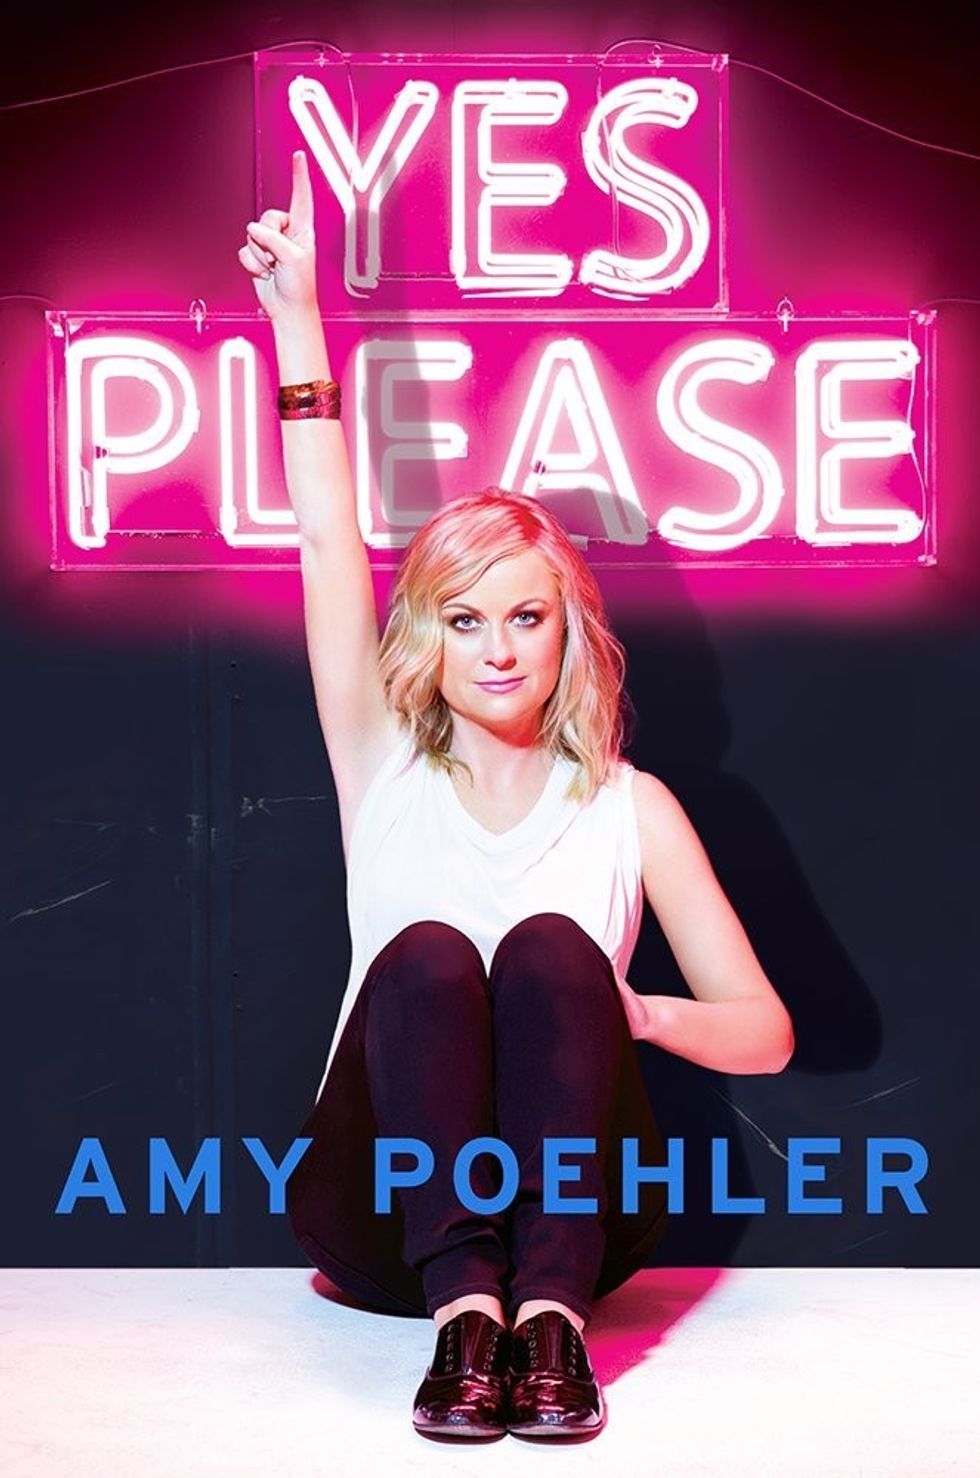 "Yes Please" by Amy Poehler